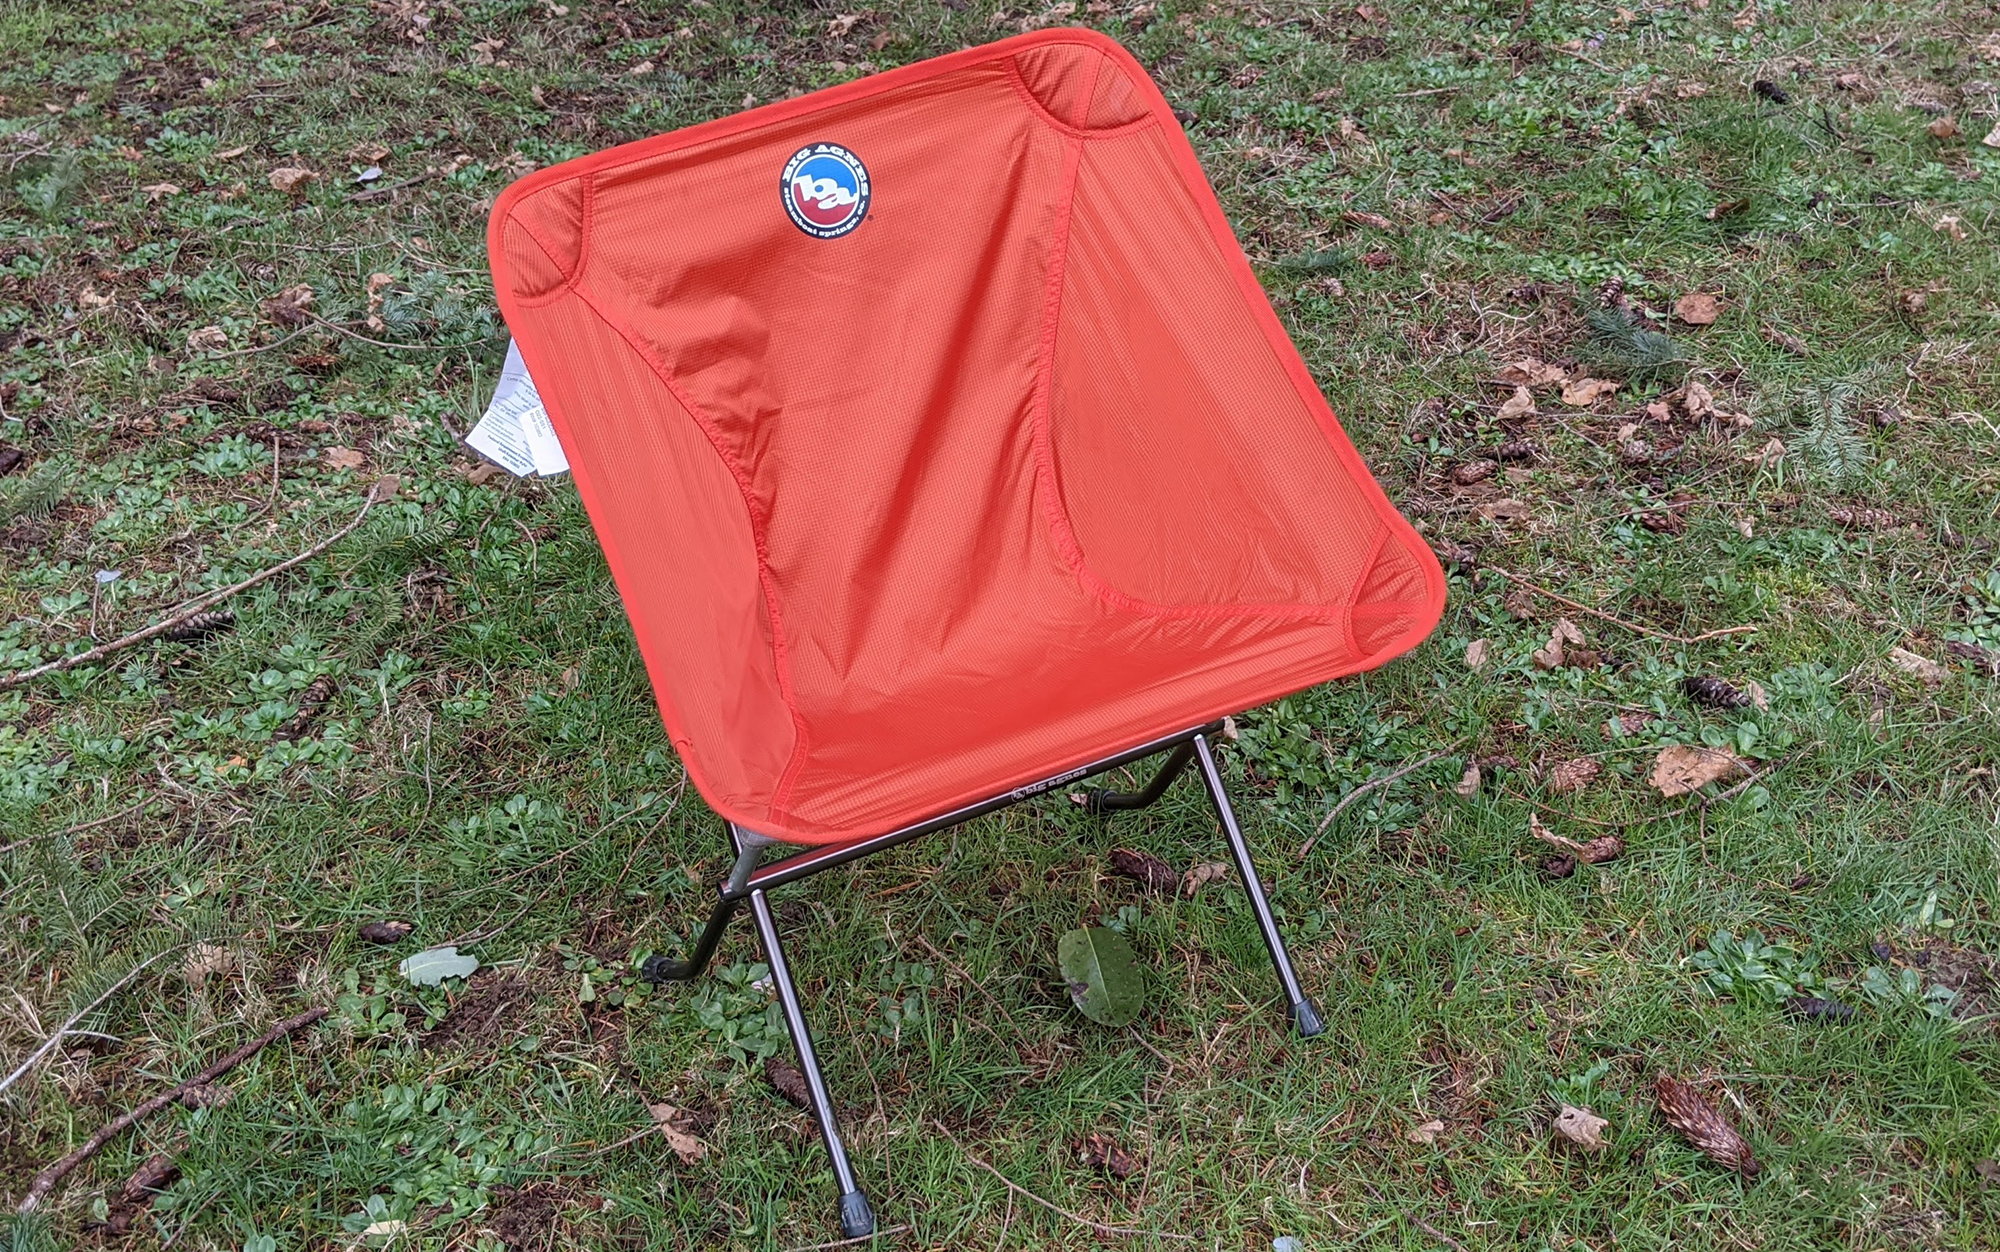 The Big Agnes Skyline UL is the most stable backpacking chair.